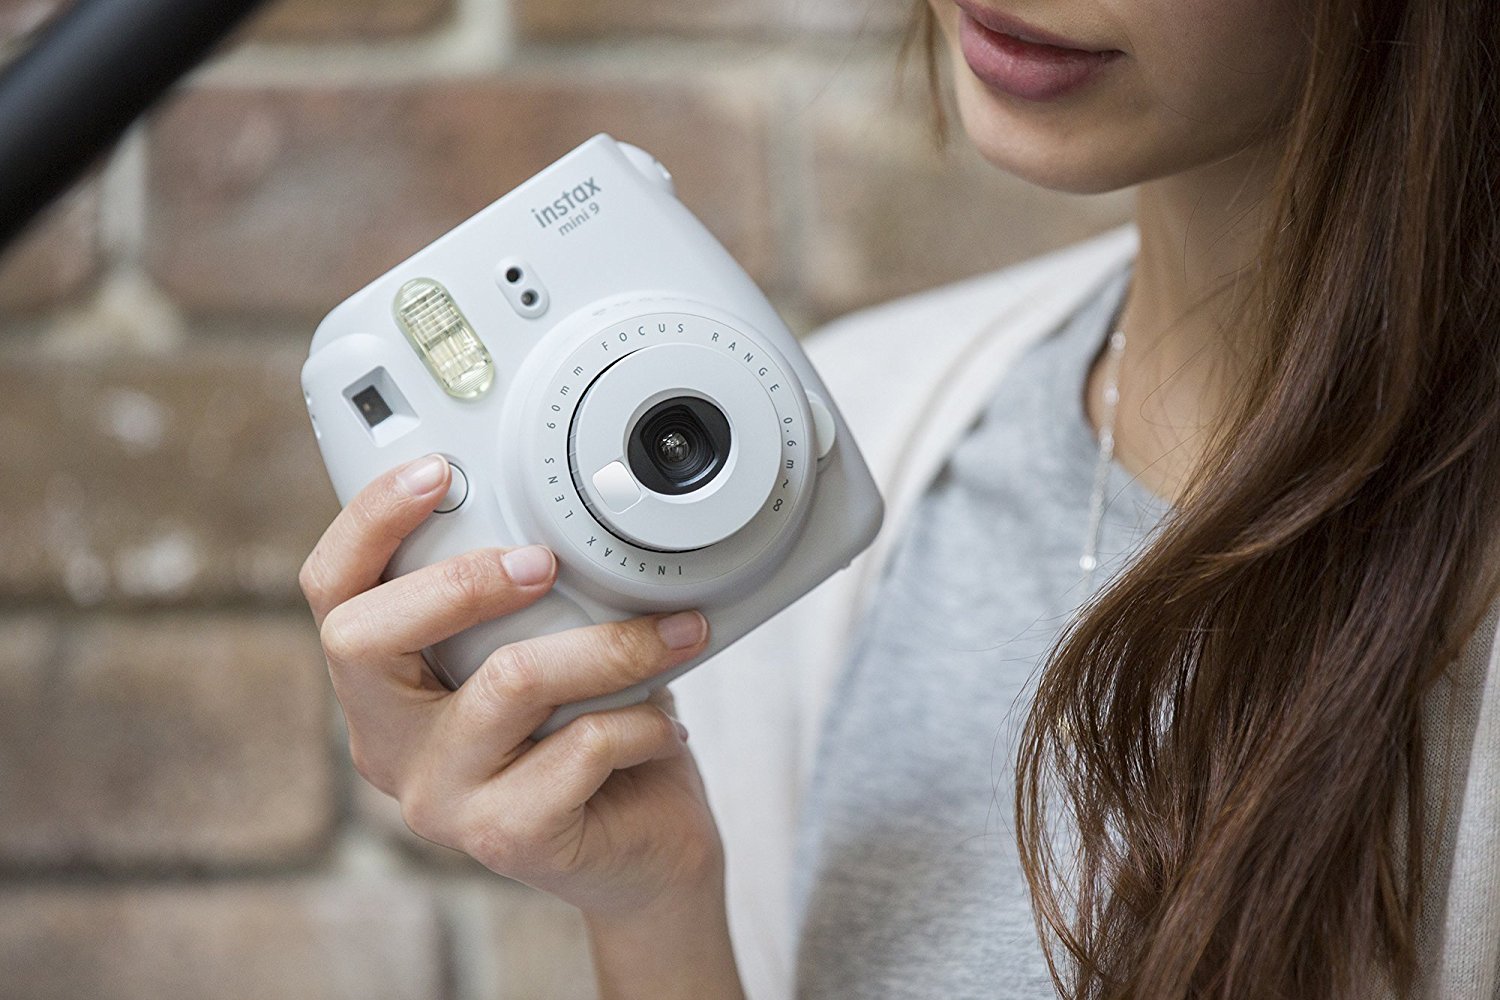 Fujifilm Instax Mini 11 review: Childhood toy camera turns out to be real